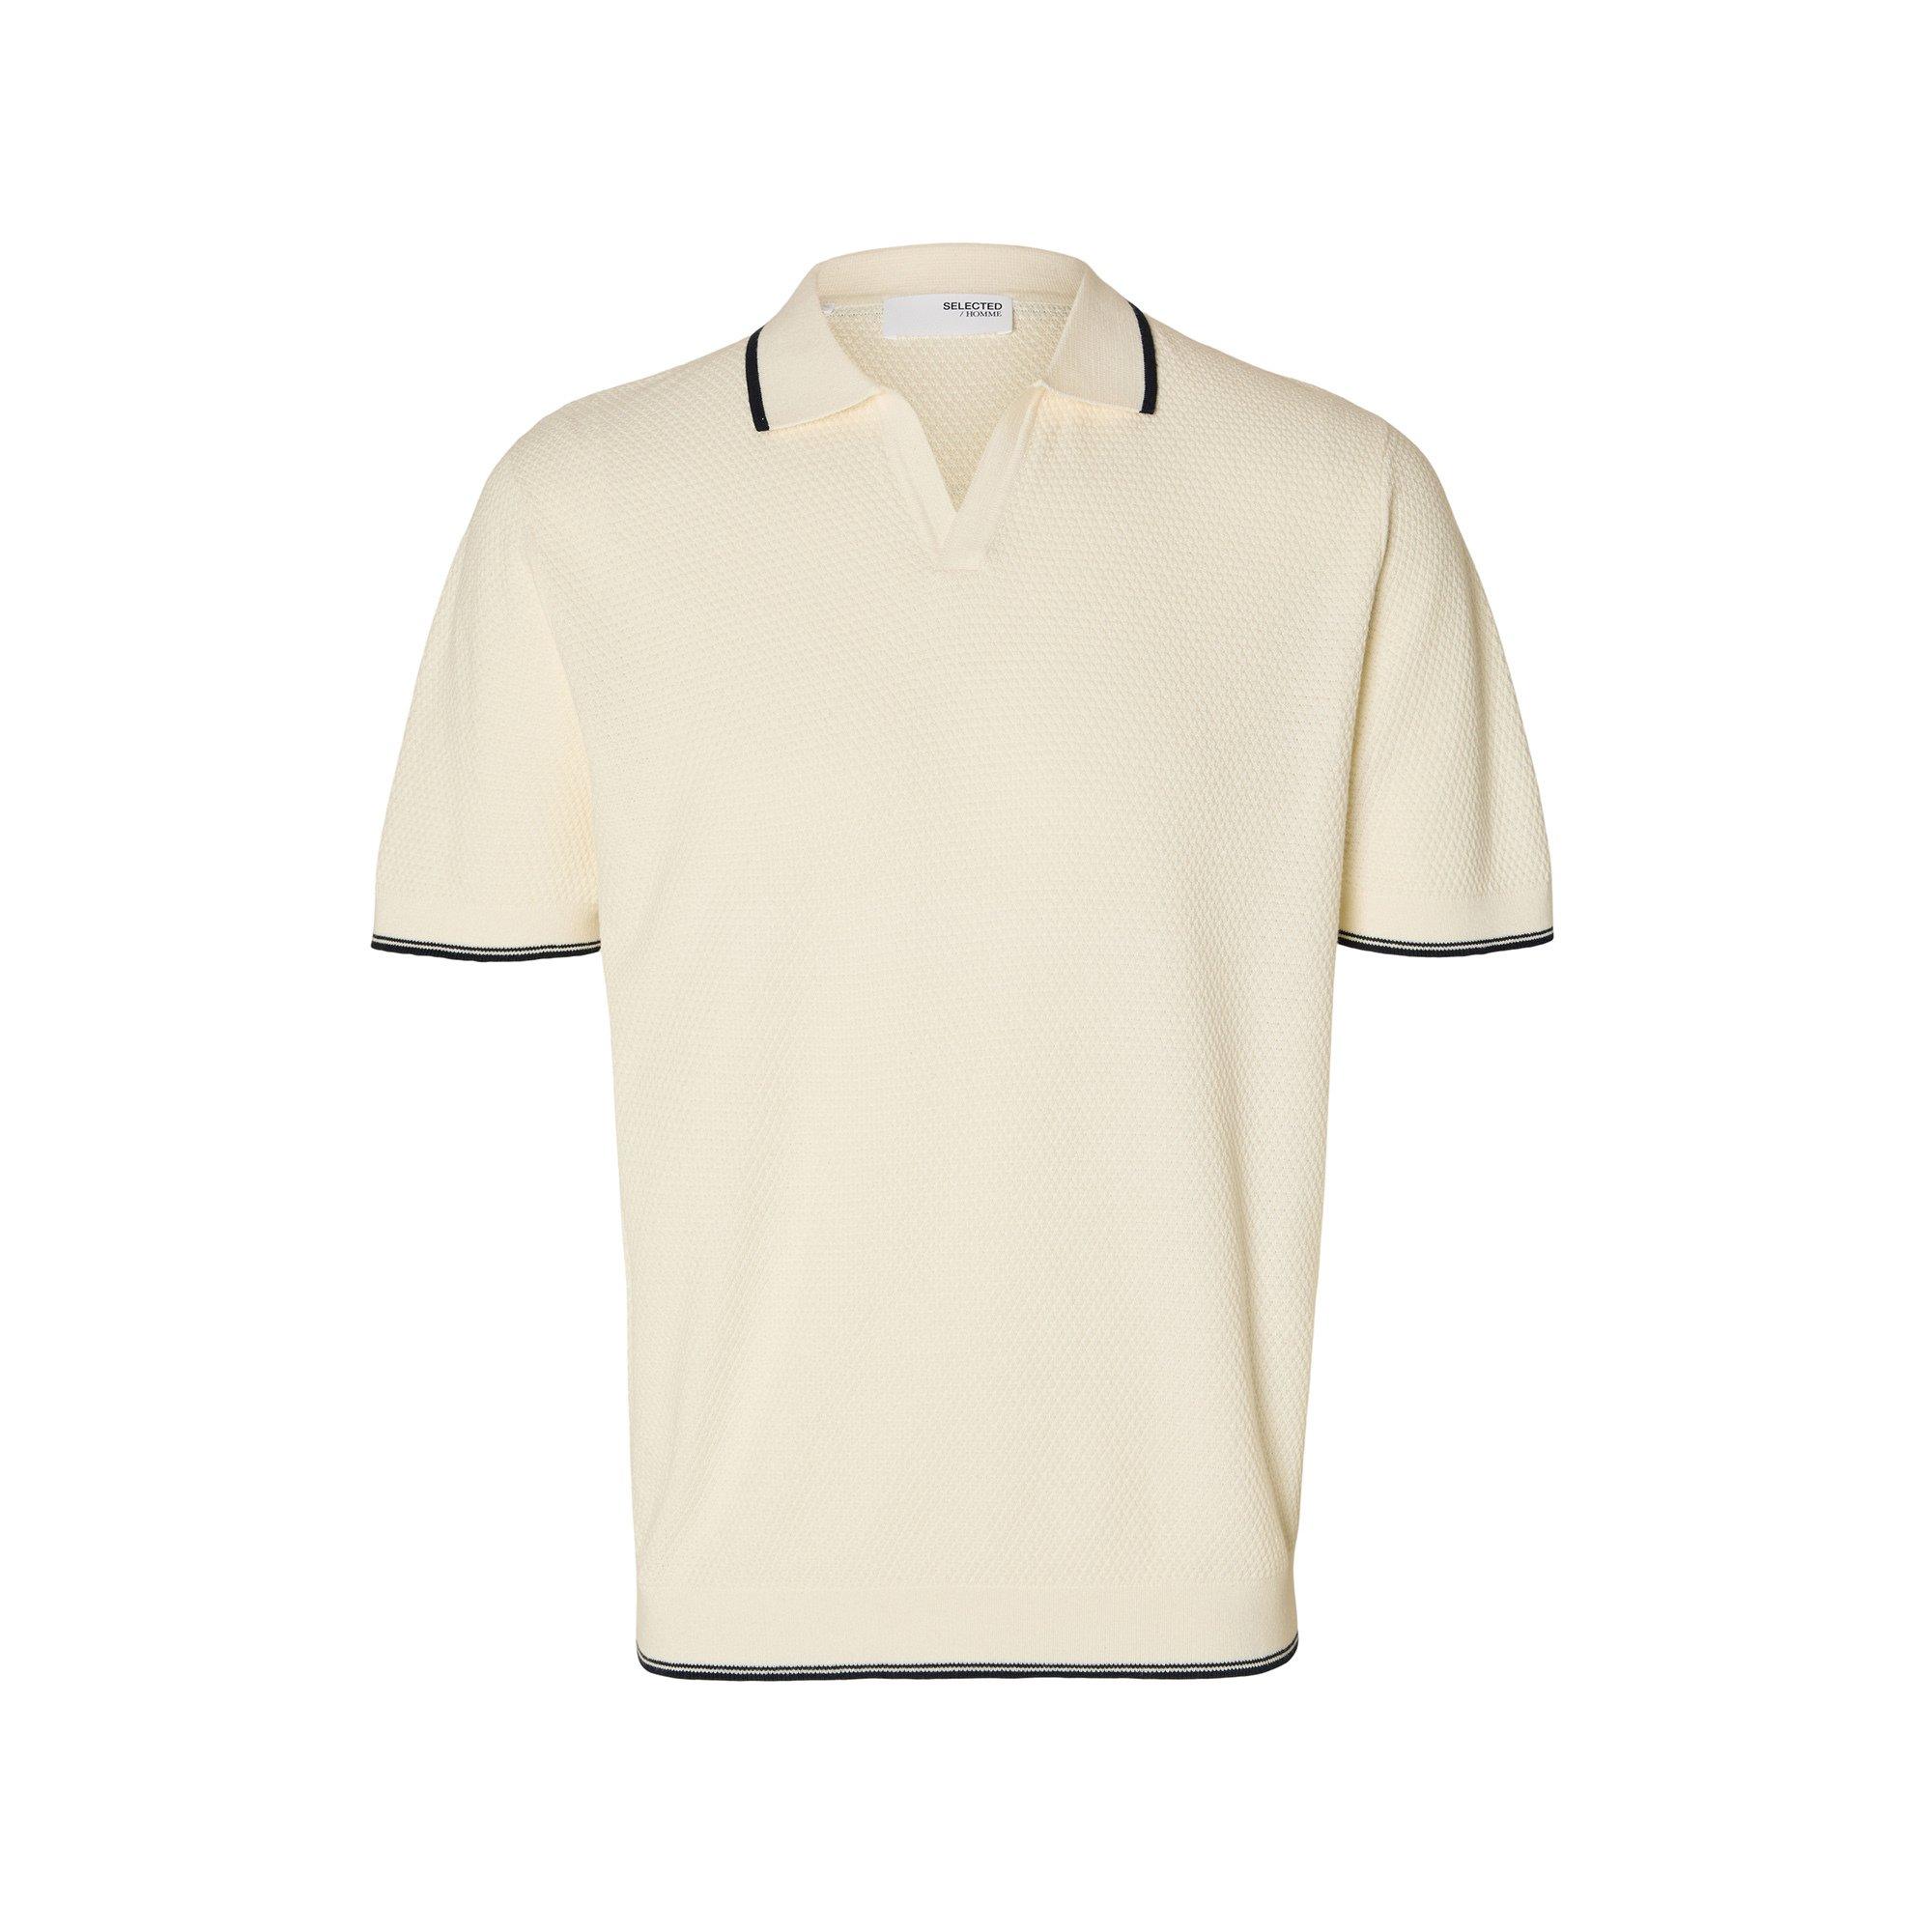 SELECTED SLHARLO SS KNIT POLO Polo, manches courtes 